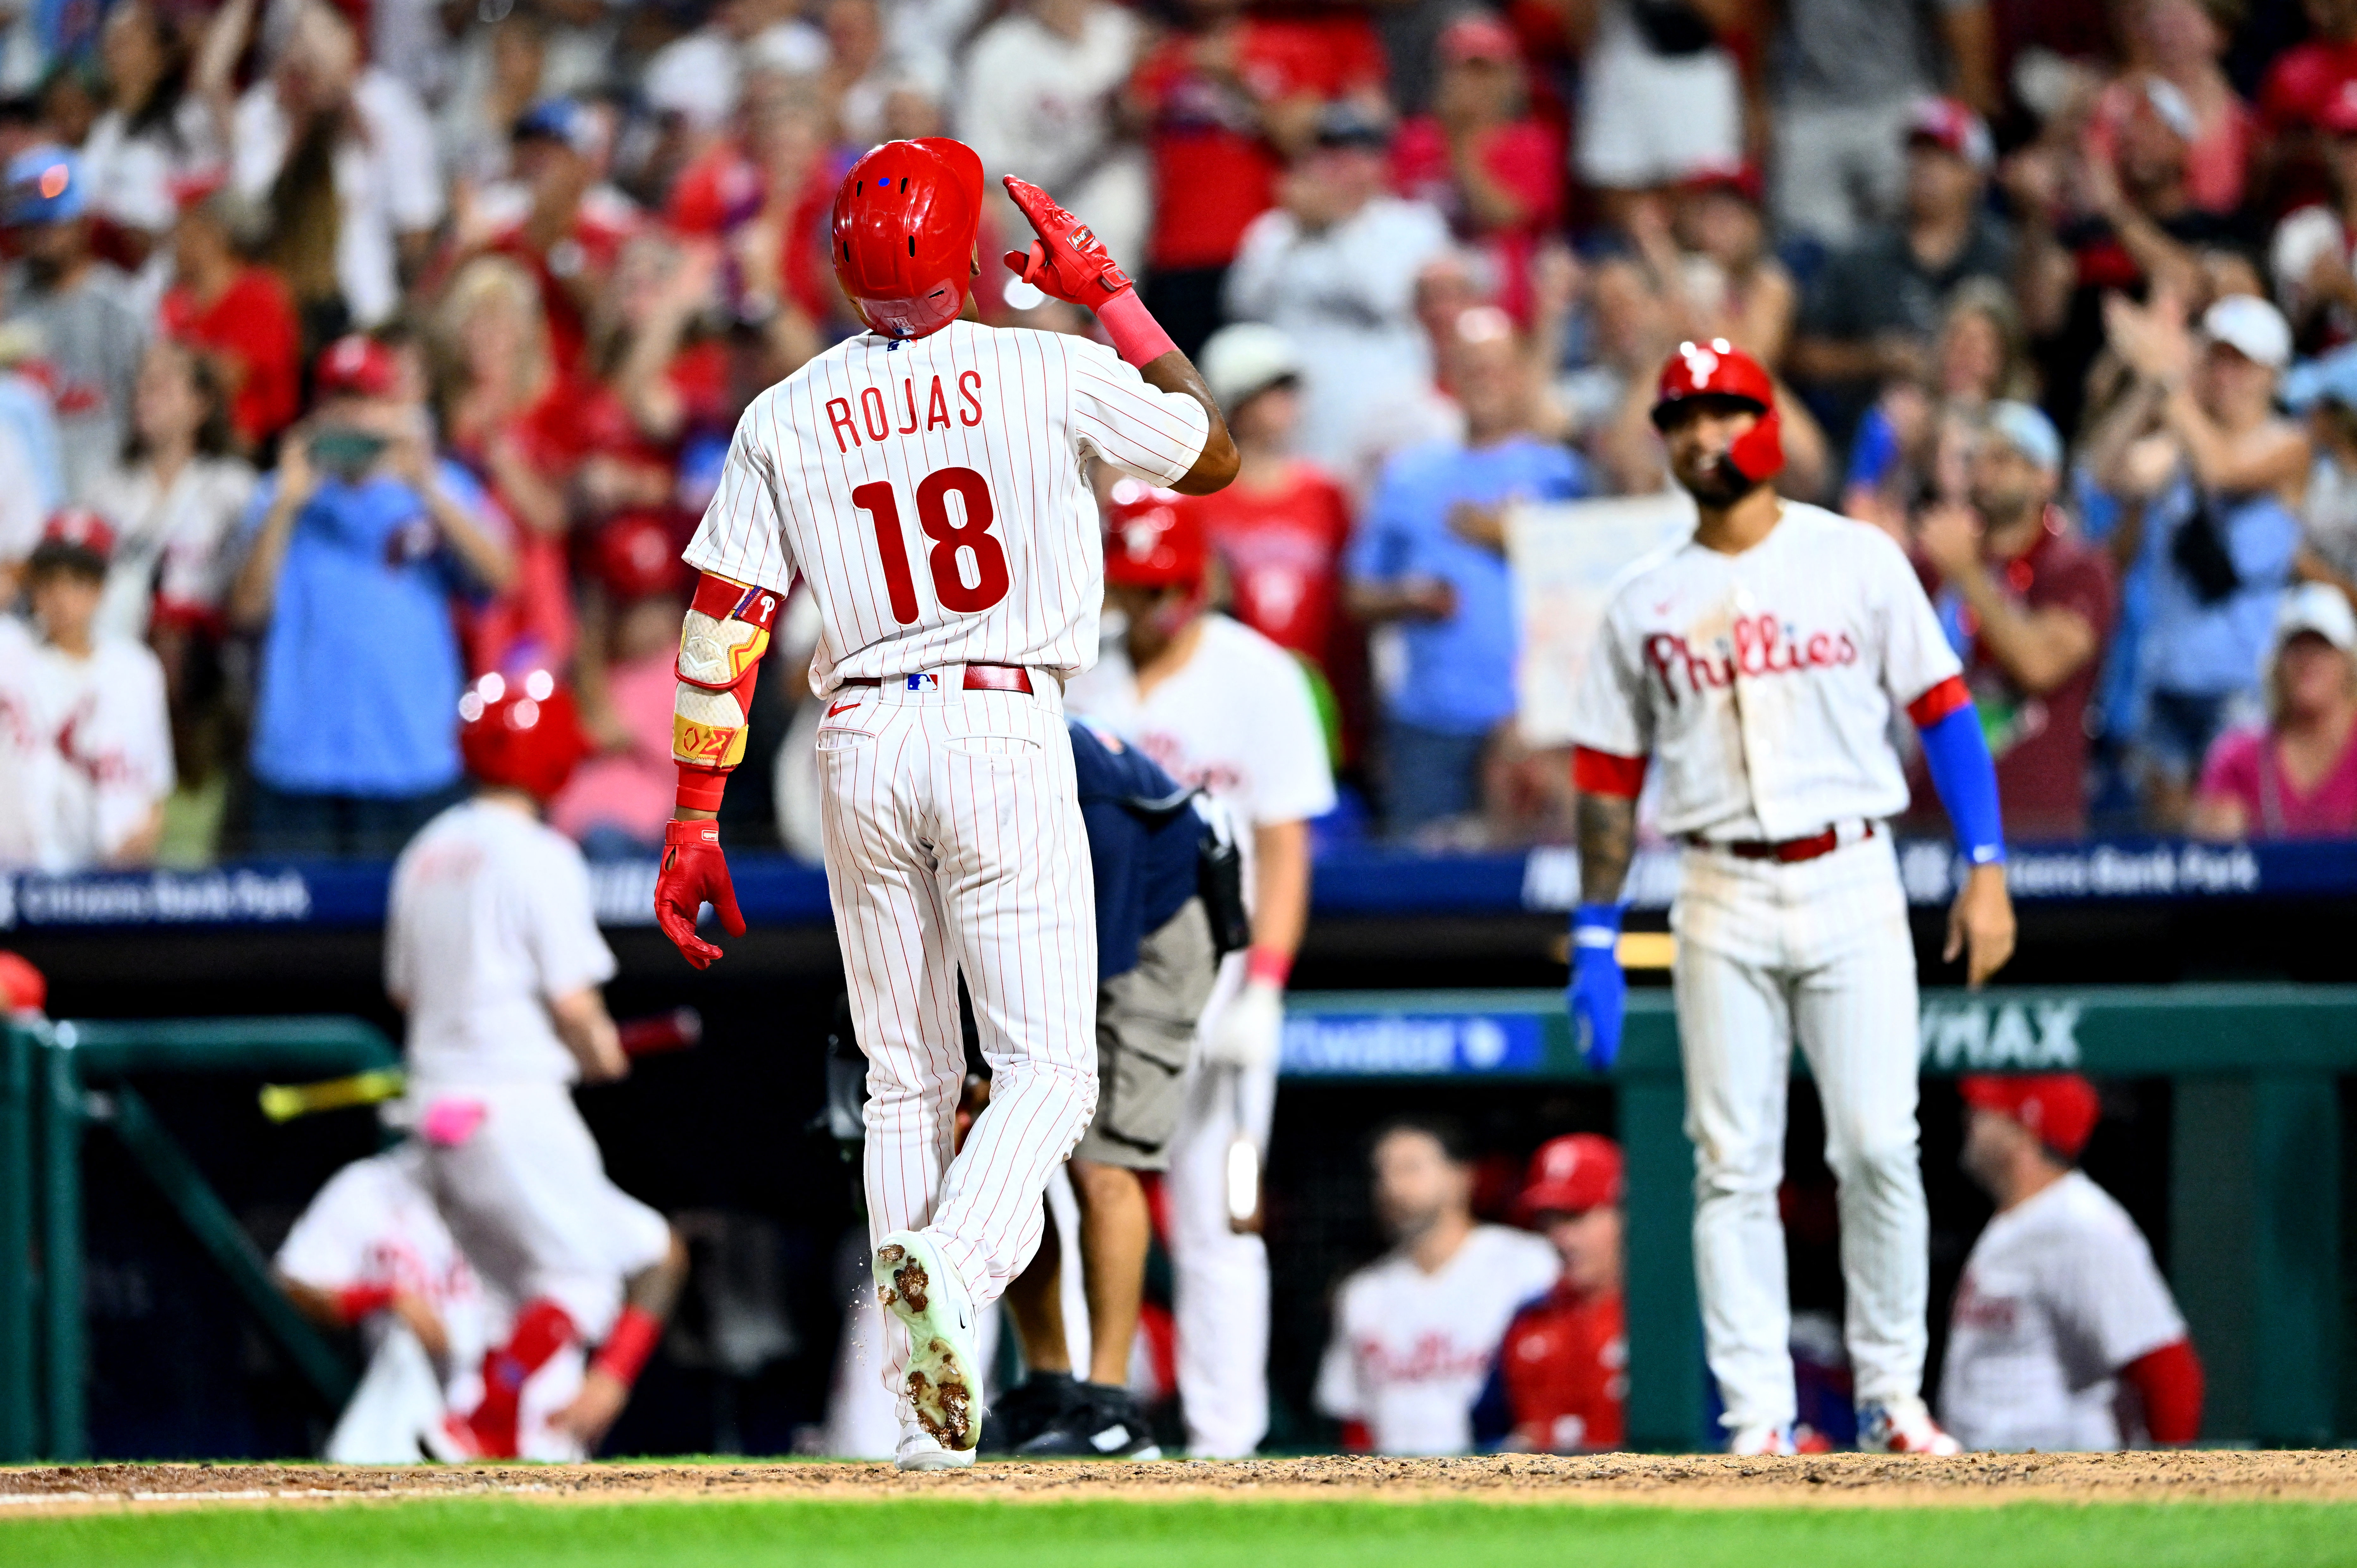 Trio of dramatic wins helps Phillies move above .500 – Macomb Daily